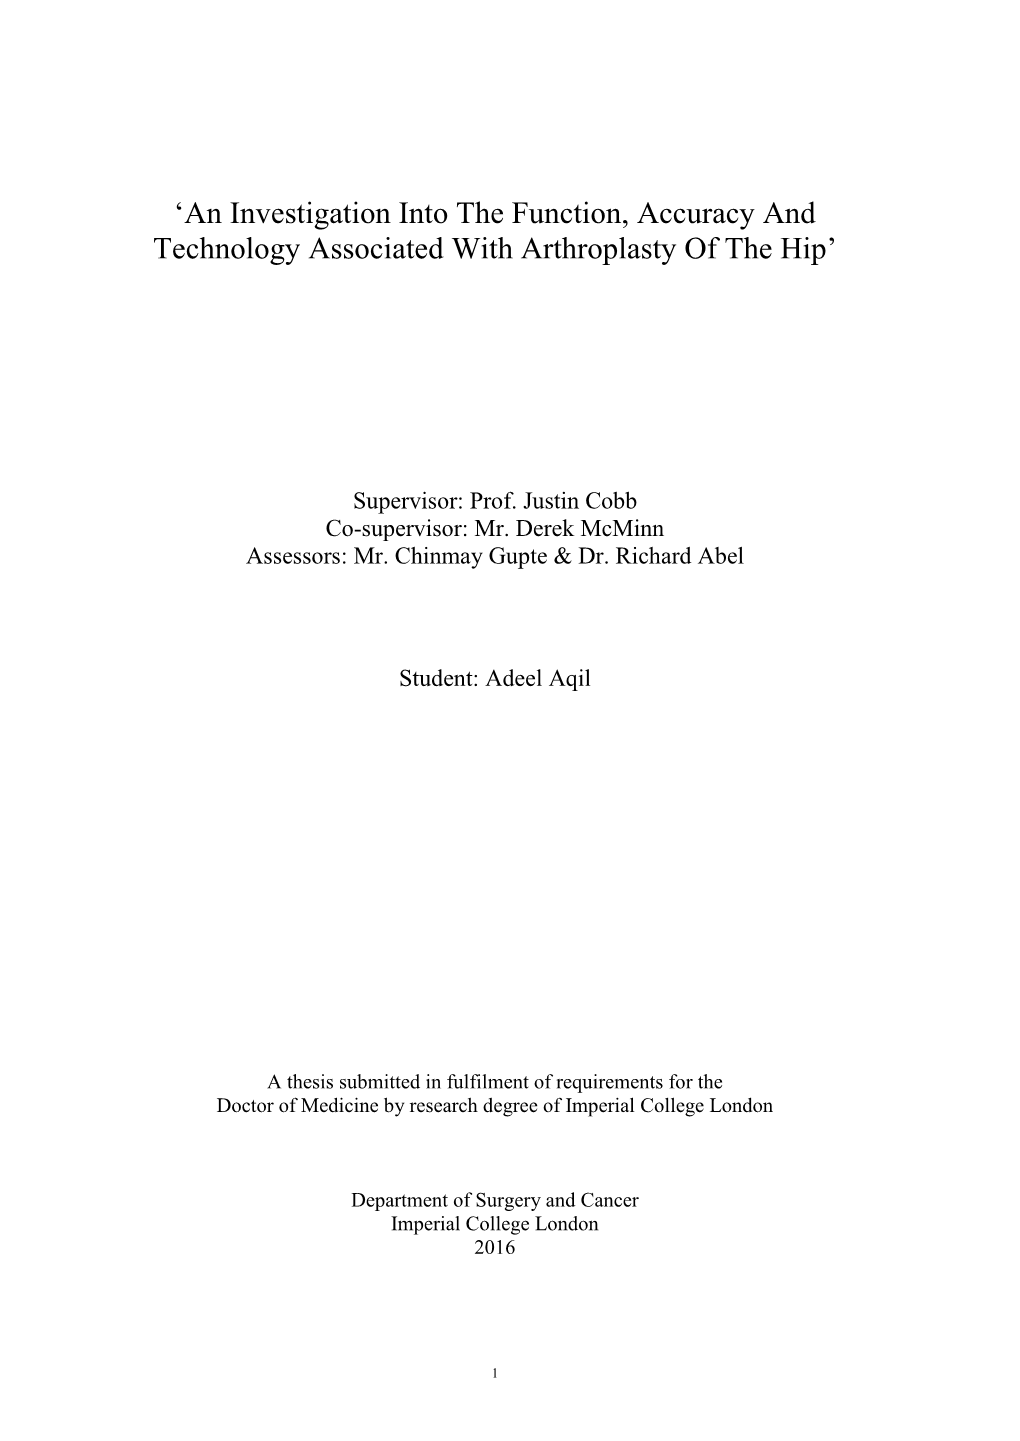 An Investigation Into the Function, Accuracy and Technology Associated with Arthroplasty of the Hip’